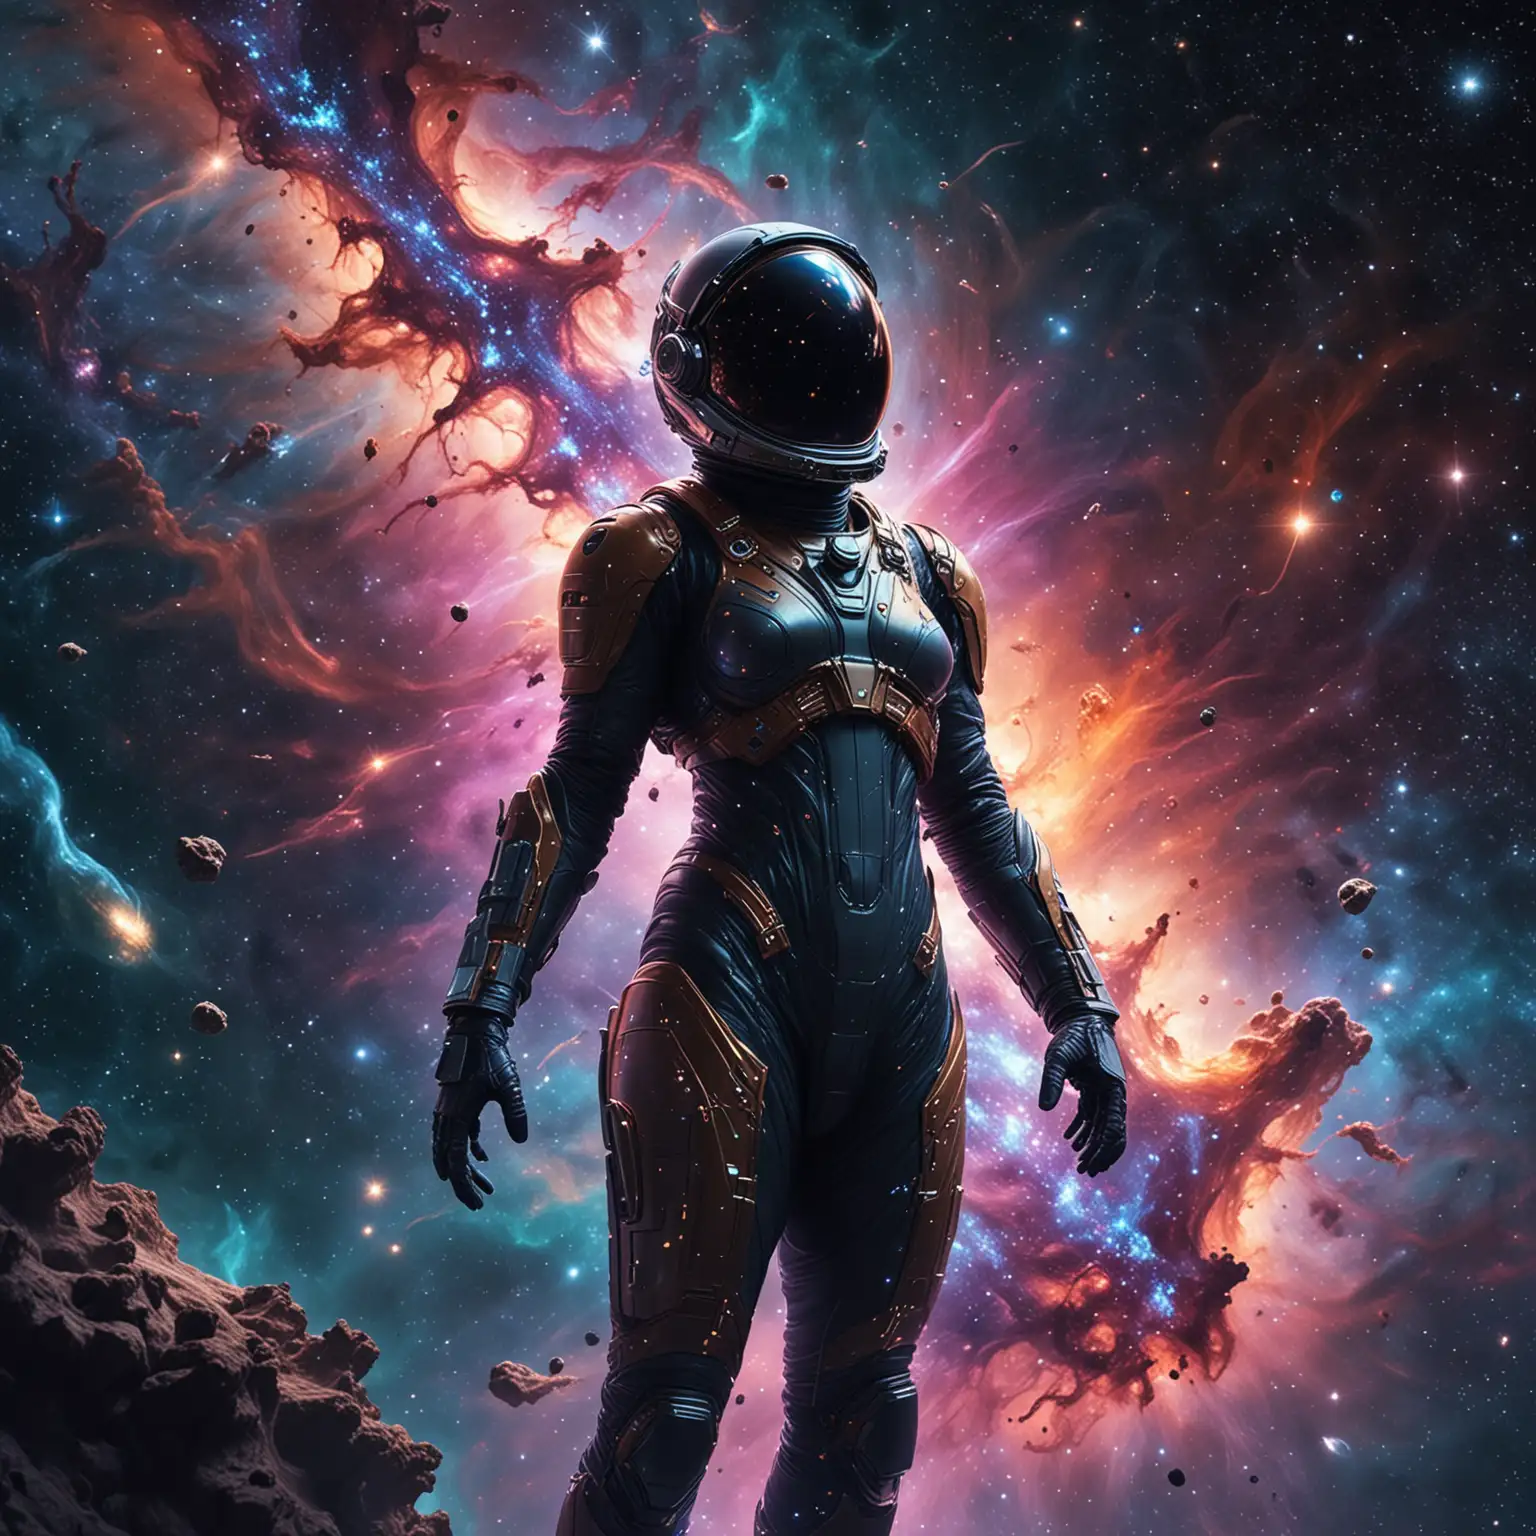 Imagine prompt: A lone astronaut, mesmerized by the boundless expanse of the universe. Countless galaxies, swirling in a mesmerizing dance of vibrant hues, resemble a vast neural network stretching across the cosmos. Shimmering wisps of dark matter weave through the scene, hinting at unseen forces. The astronaut, wearing a sleek vibrain suit that glows with an otherworldly light, floats amidst a breathtaking cosmic nebula. Galactic fantasy style. Highly detailed and realistic. Aspect ratio 2:1.